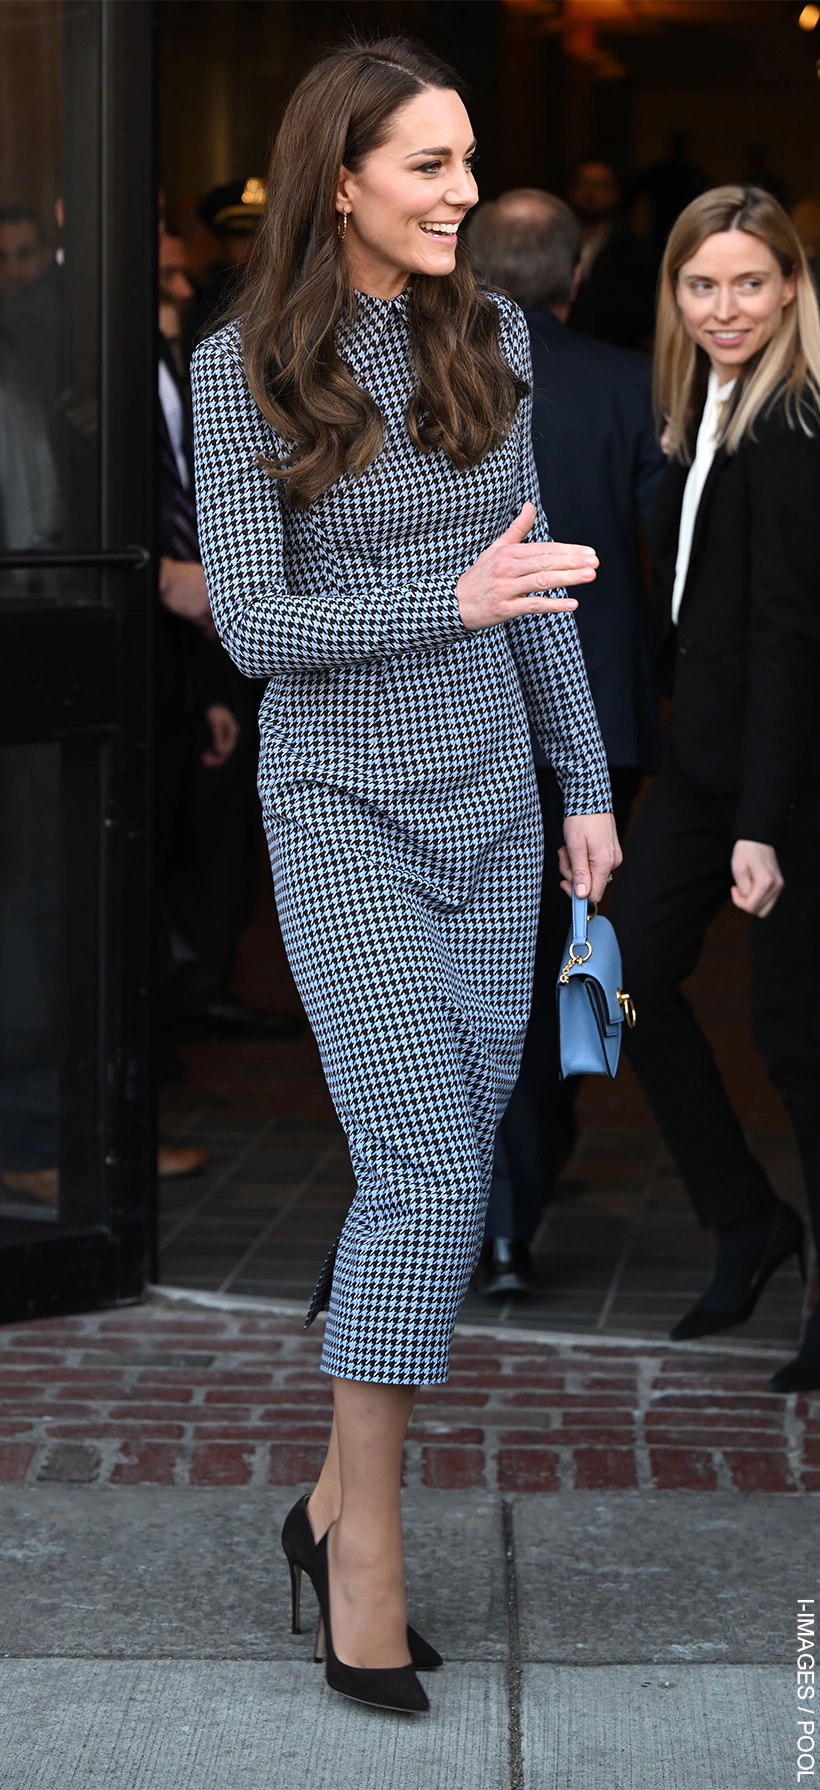 Kate Middleton's most polished and professional look yet? Princess wears houndstooth  dress to talk to Harvard experts about early childhood